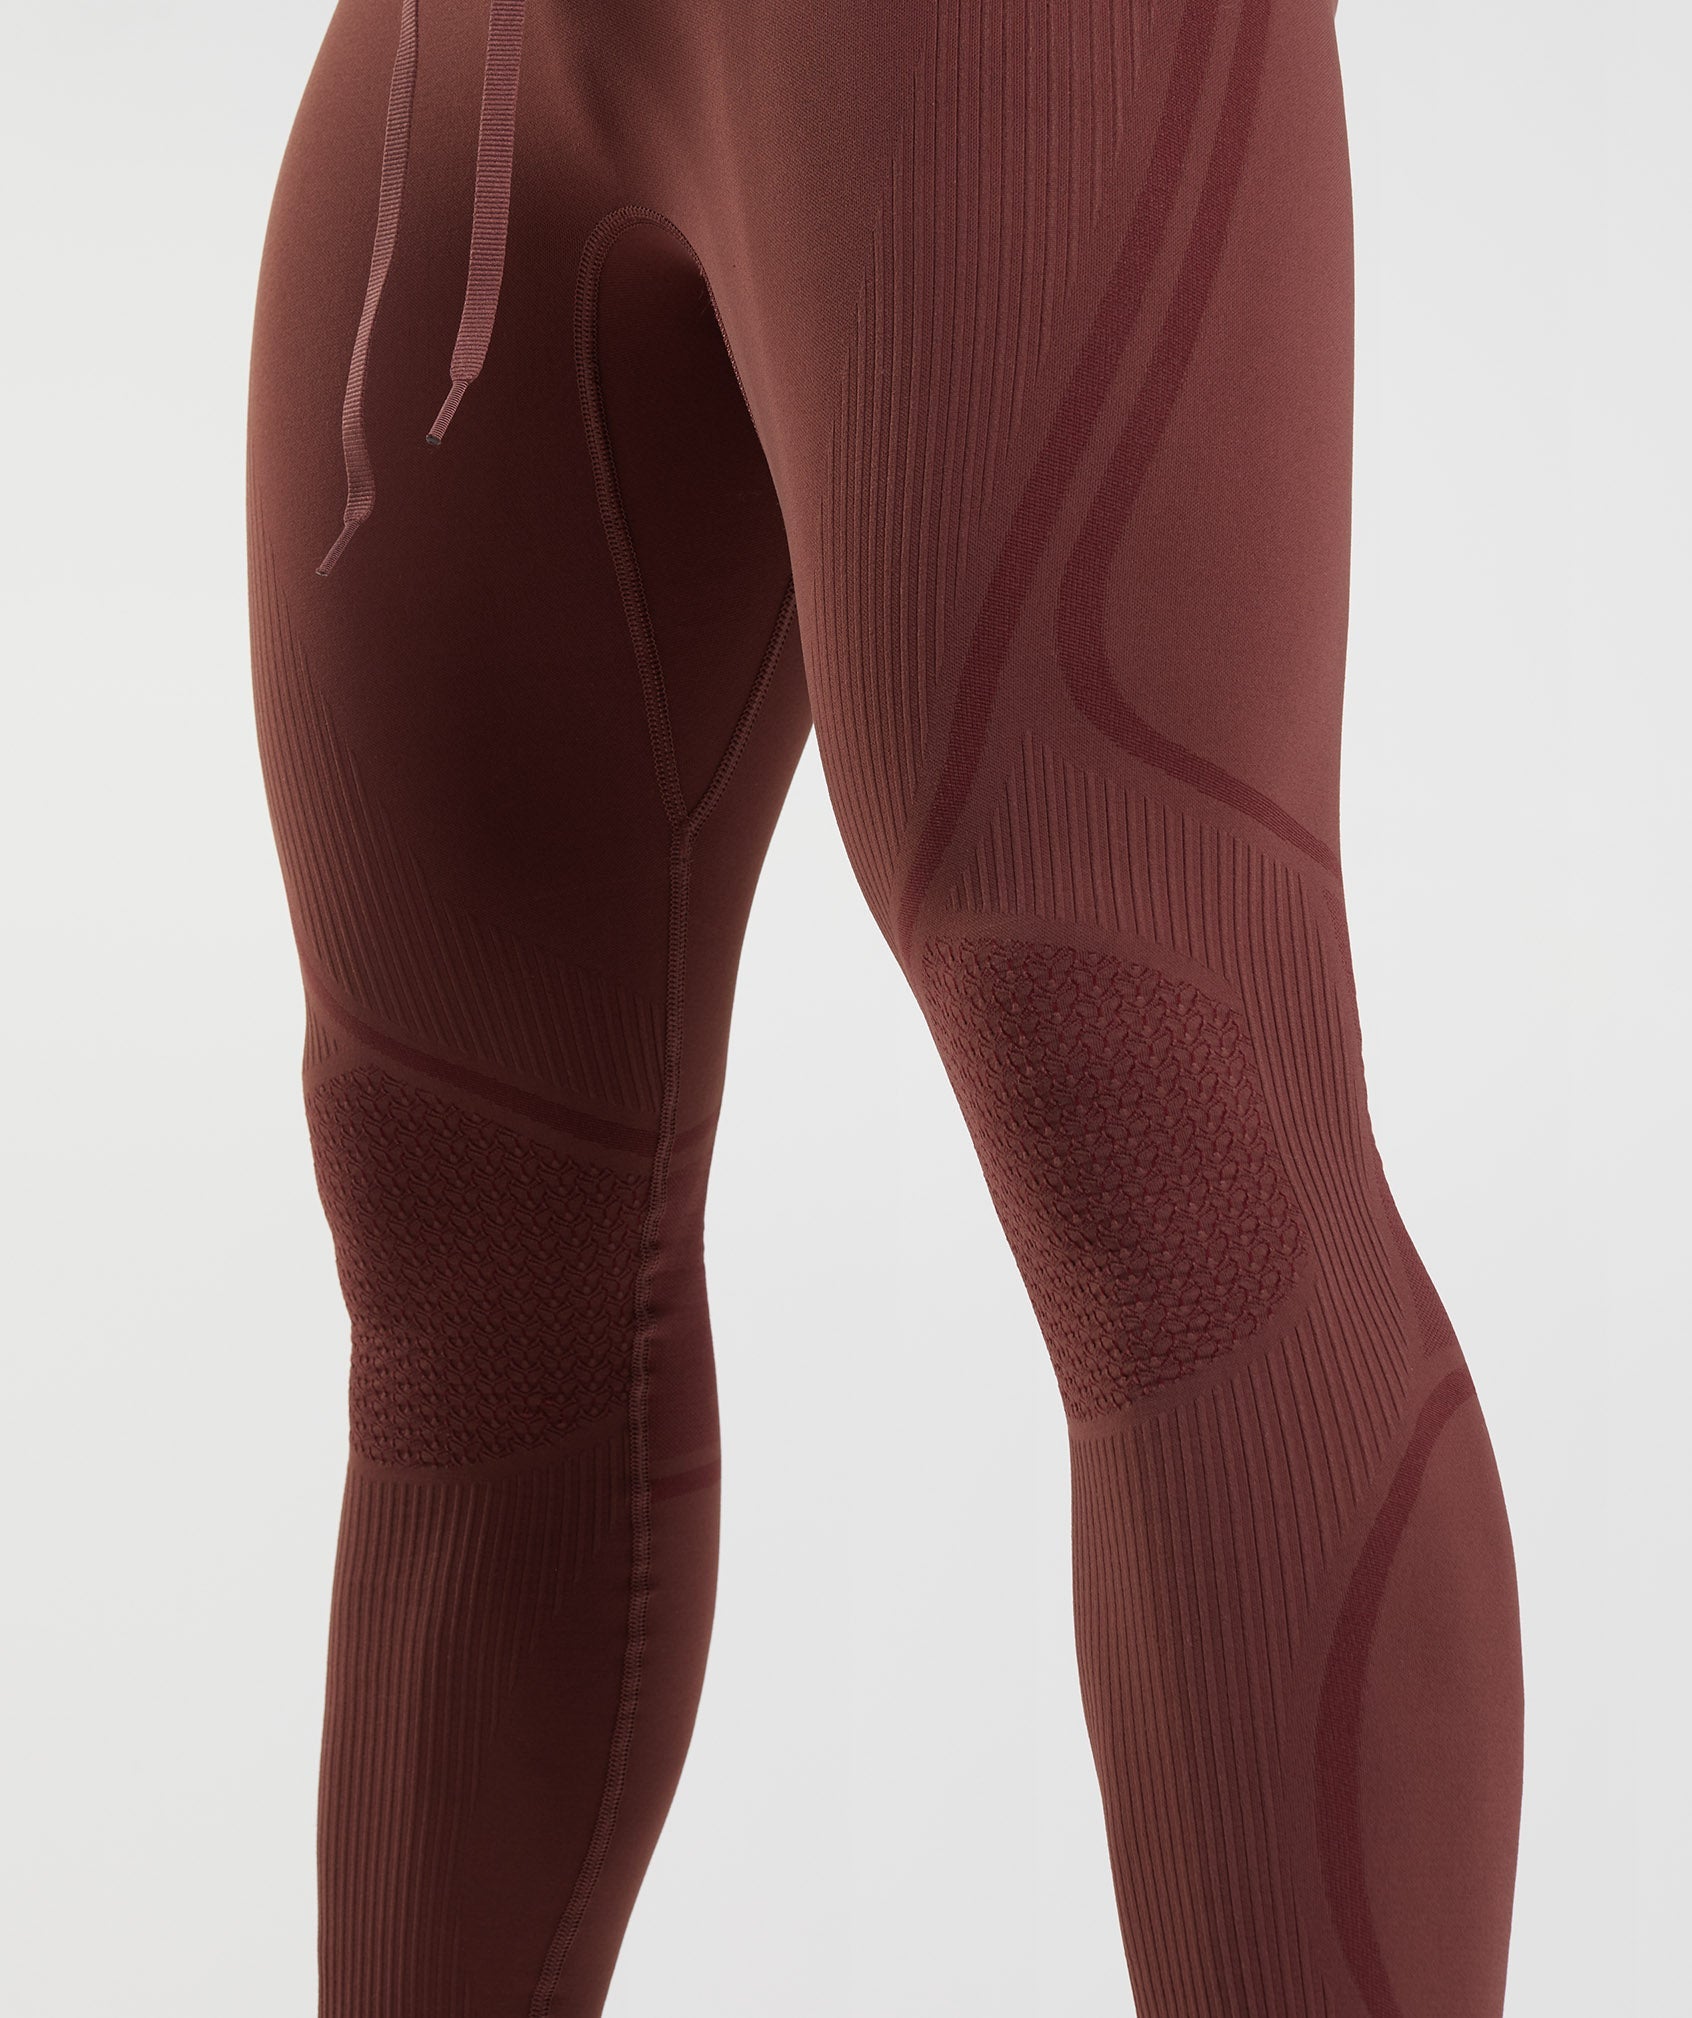 315 Seamless Tights in Cherry Brown/Athletic Maroon - view 7